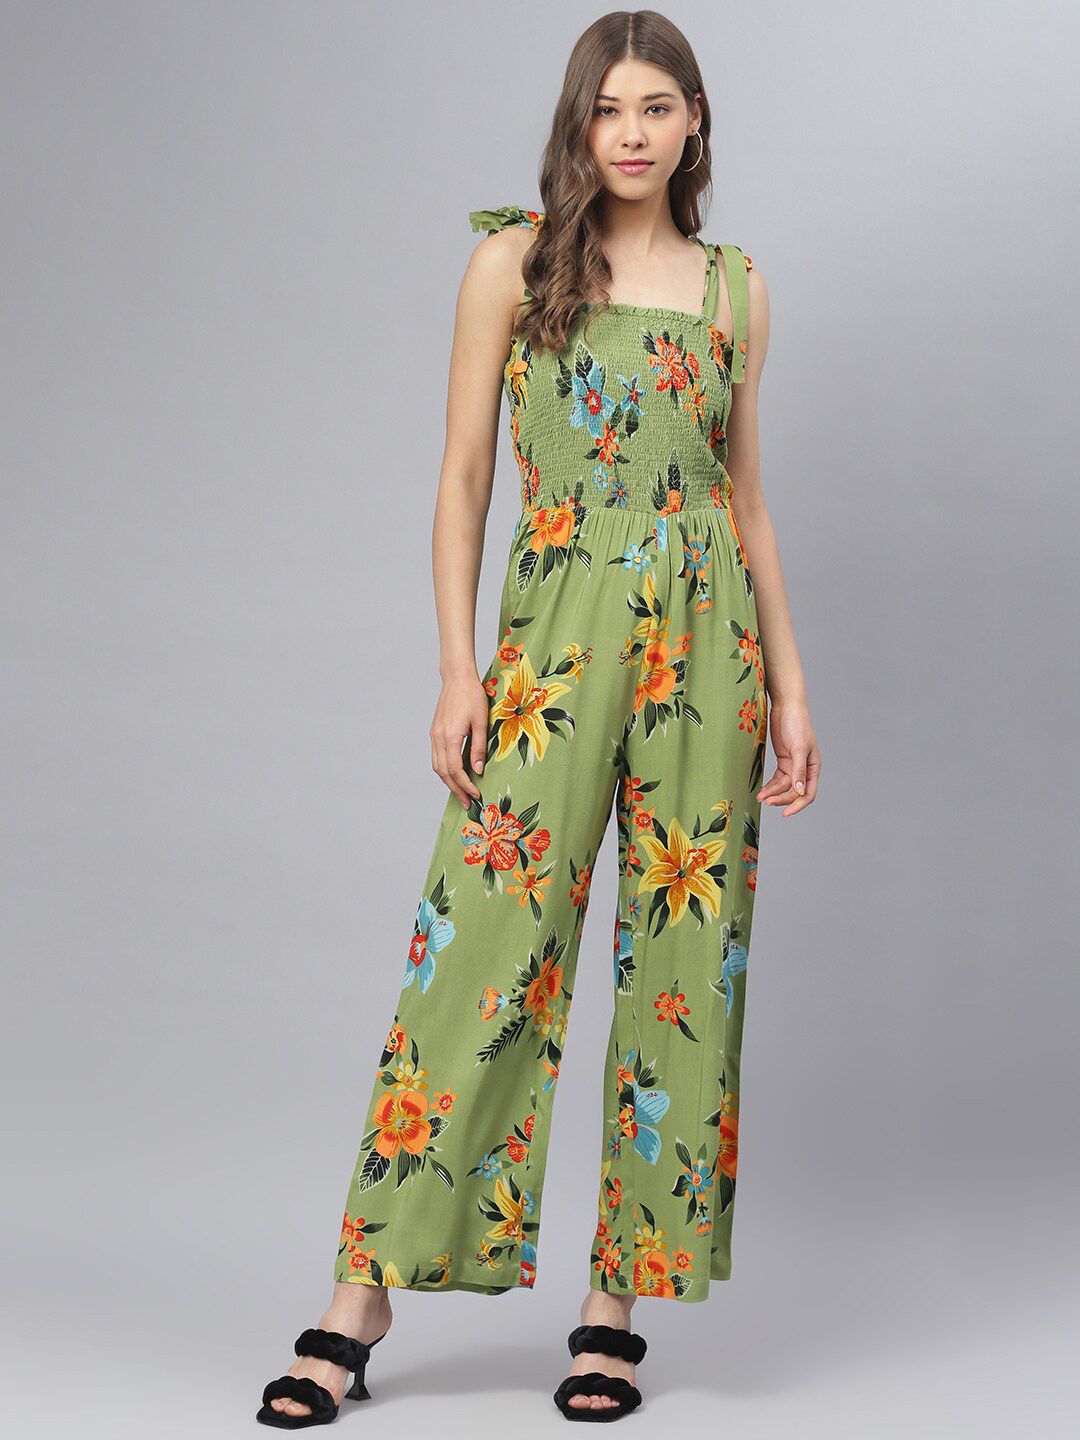 DEEBACO Green & Yellow Printed Smocking Tie-Up Culotte Jumpsuit Price in India